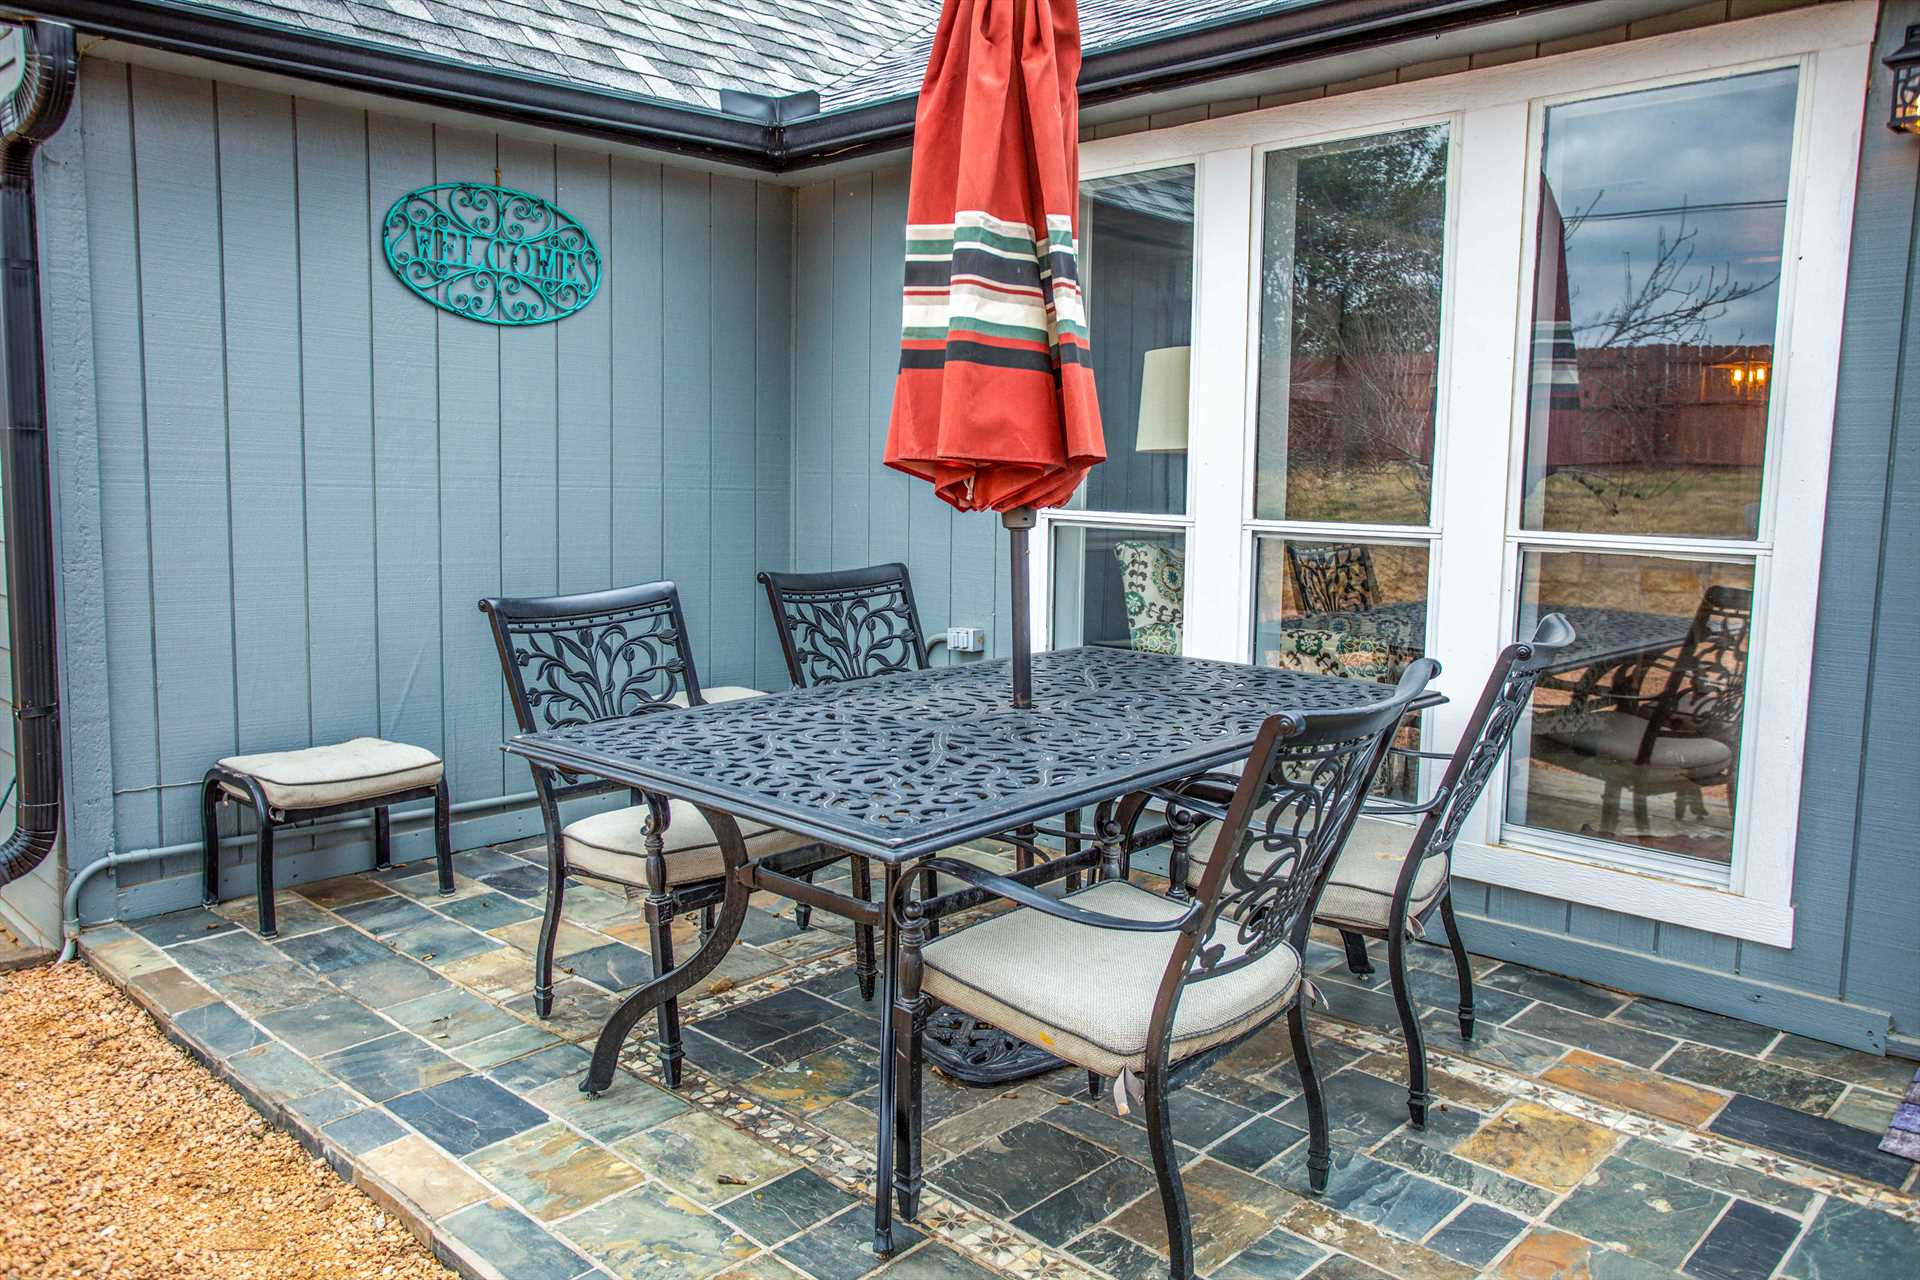                                                 Our guests love the custom stone flooring on the patio here, it matches the house's decor, and goes great with the outdoor dining suite!